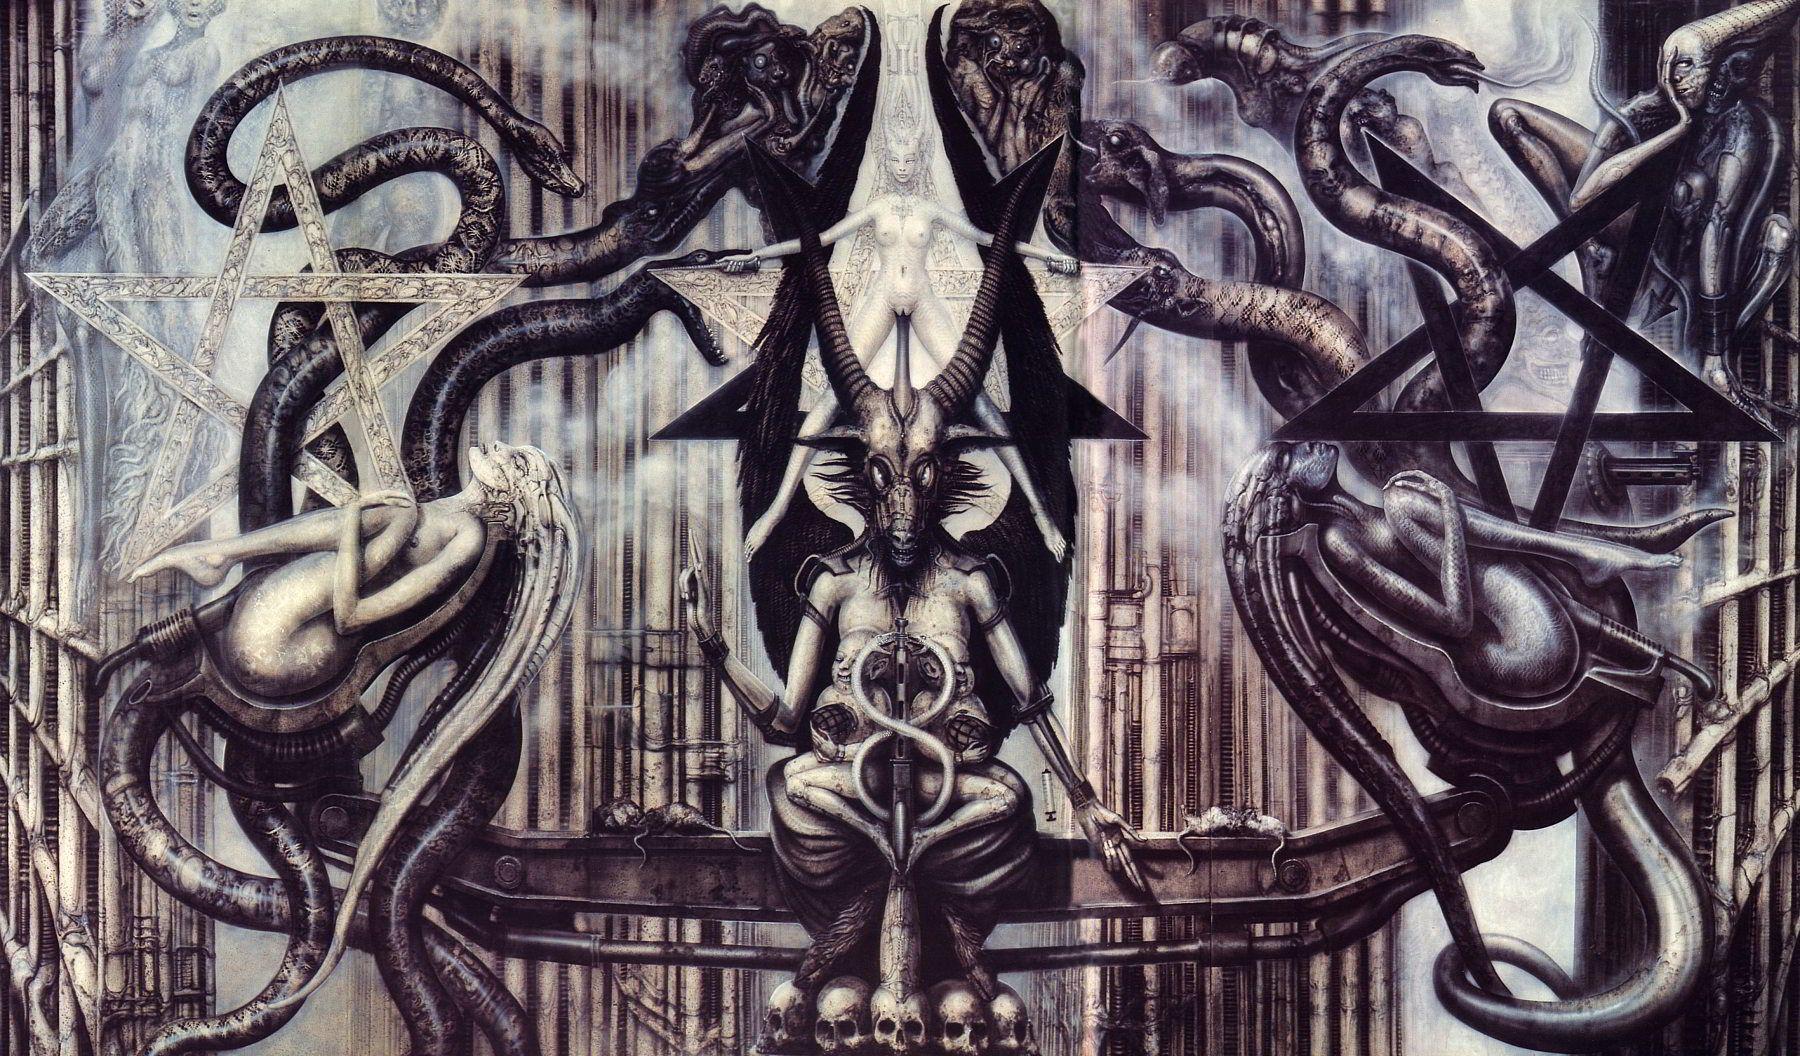 Rüdi Giger: The Spell IV